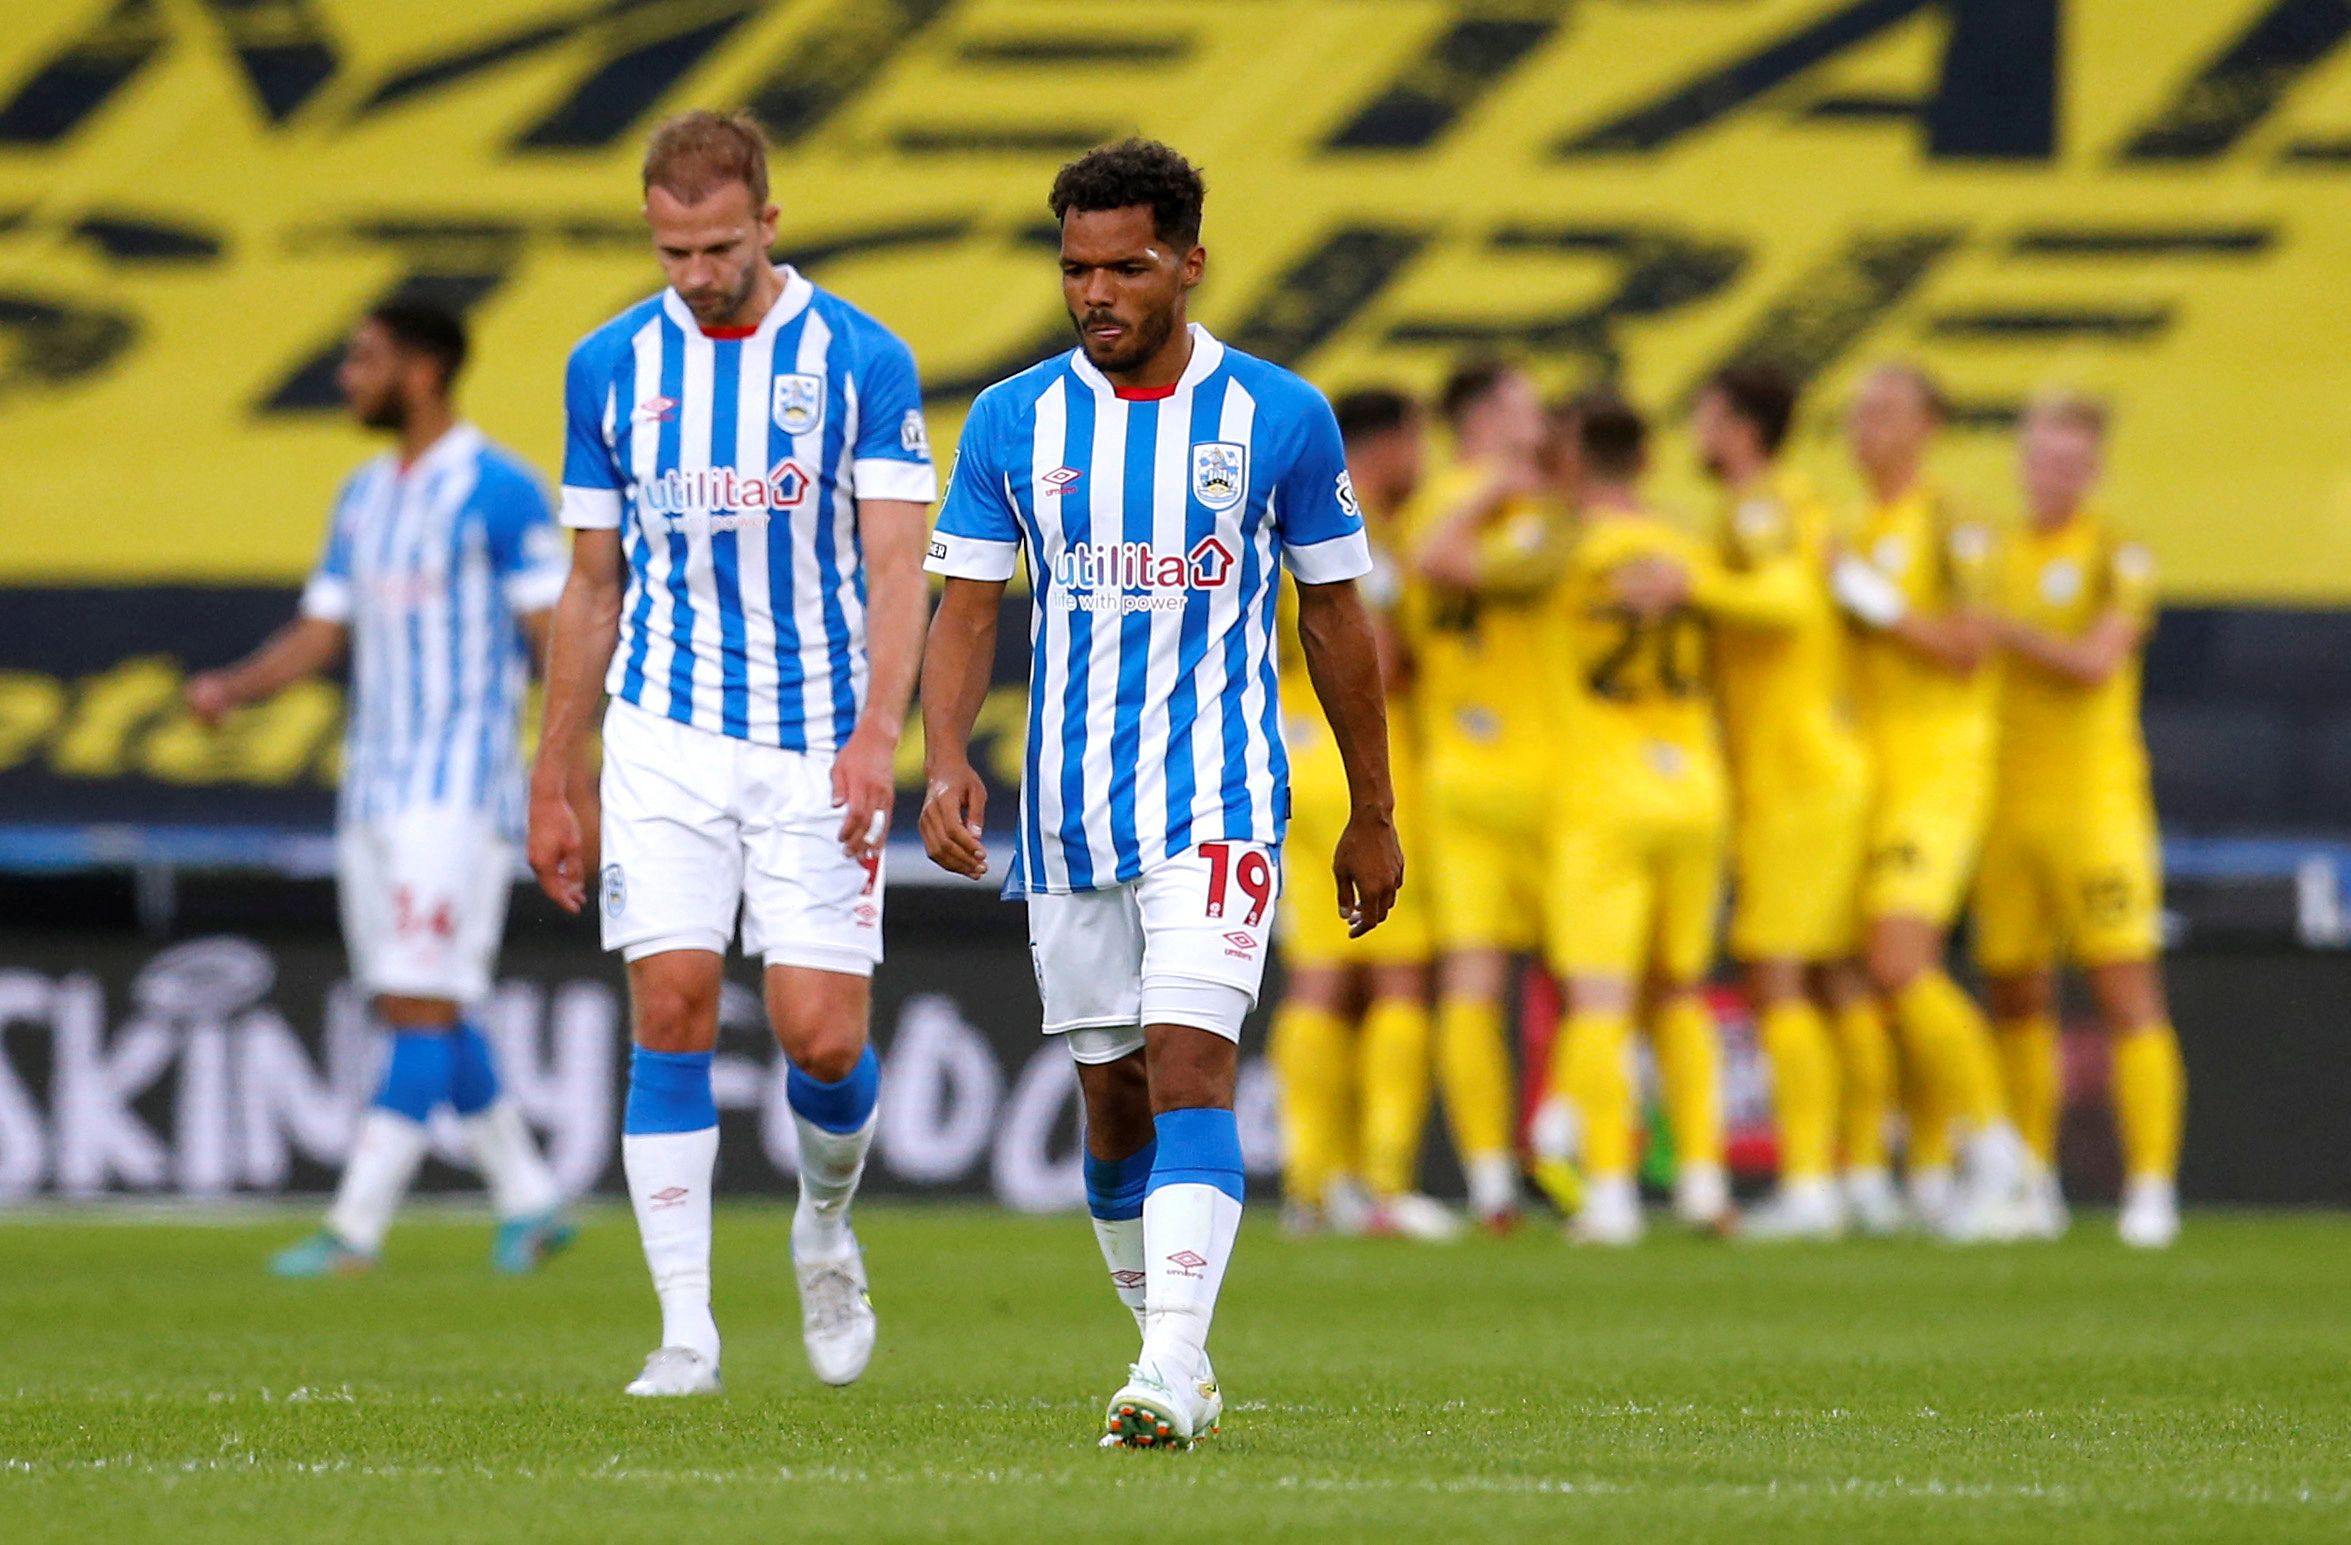 Soccer Football - Carabao Cup - Huddersfield Town v Preston North End - John Smith's Stadium, Huddersfield, Britain - August 9, 2022 Huddersfield Town's Duane Holmes and Jordan Rhodes look dejected after Preston North End scores their third goal Action Images/Ed Sykes  EDITORIAL USE ONLY. No use with unauthorized audio, video, data, fixture lists, club/league logos or "live" services. Online in-match use limited to 75 images, no video emulation. No use in betting, games or single club/league/pla